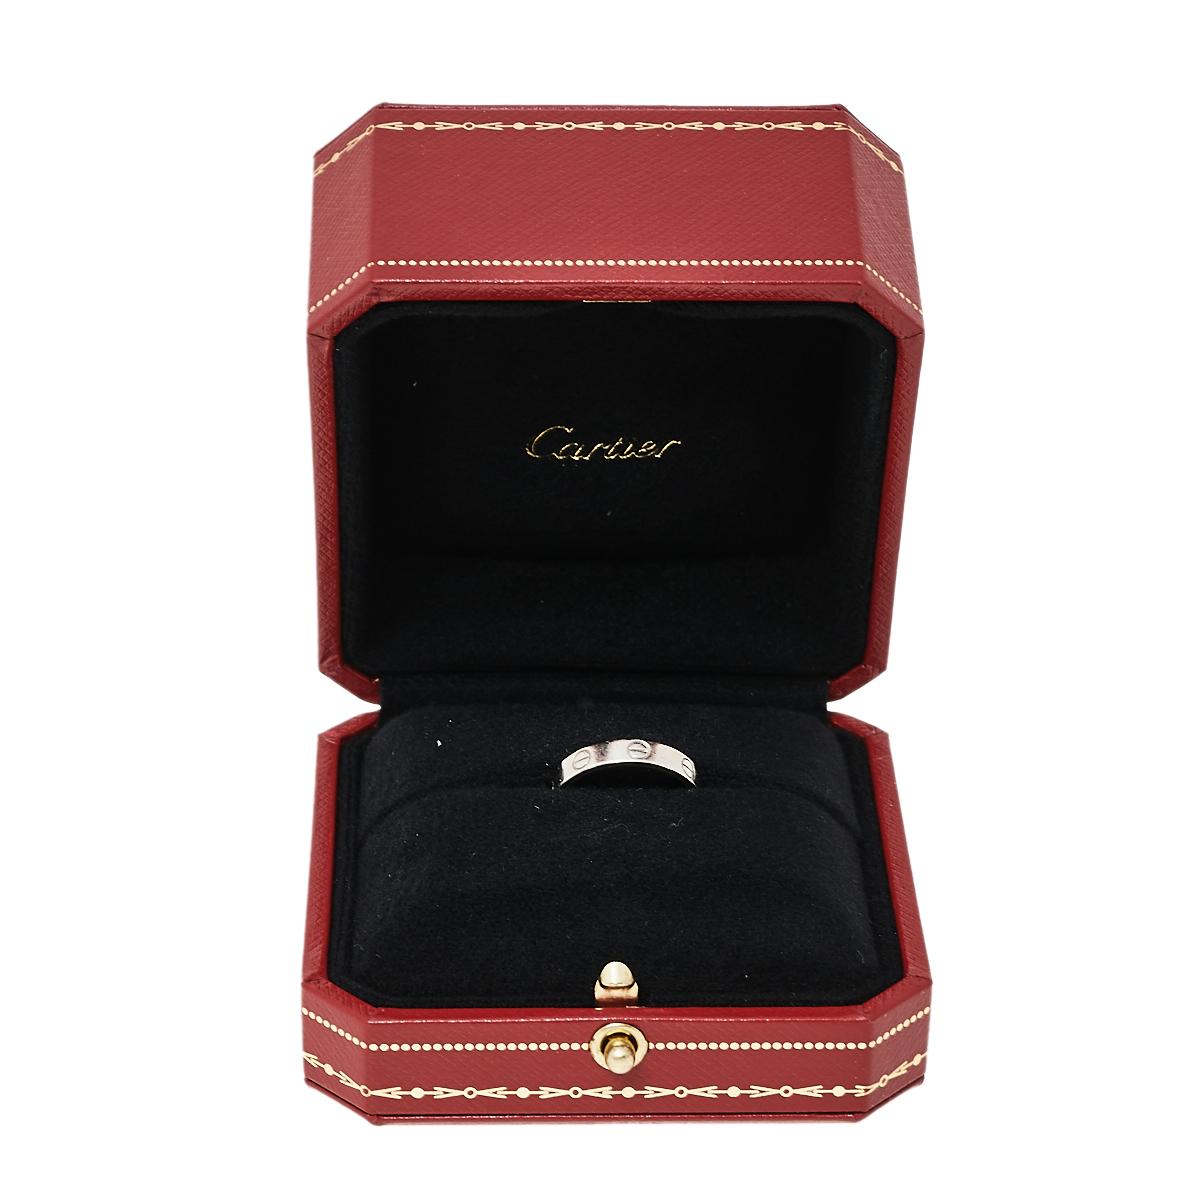 cartier ring 52